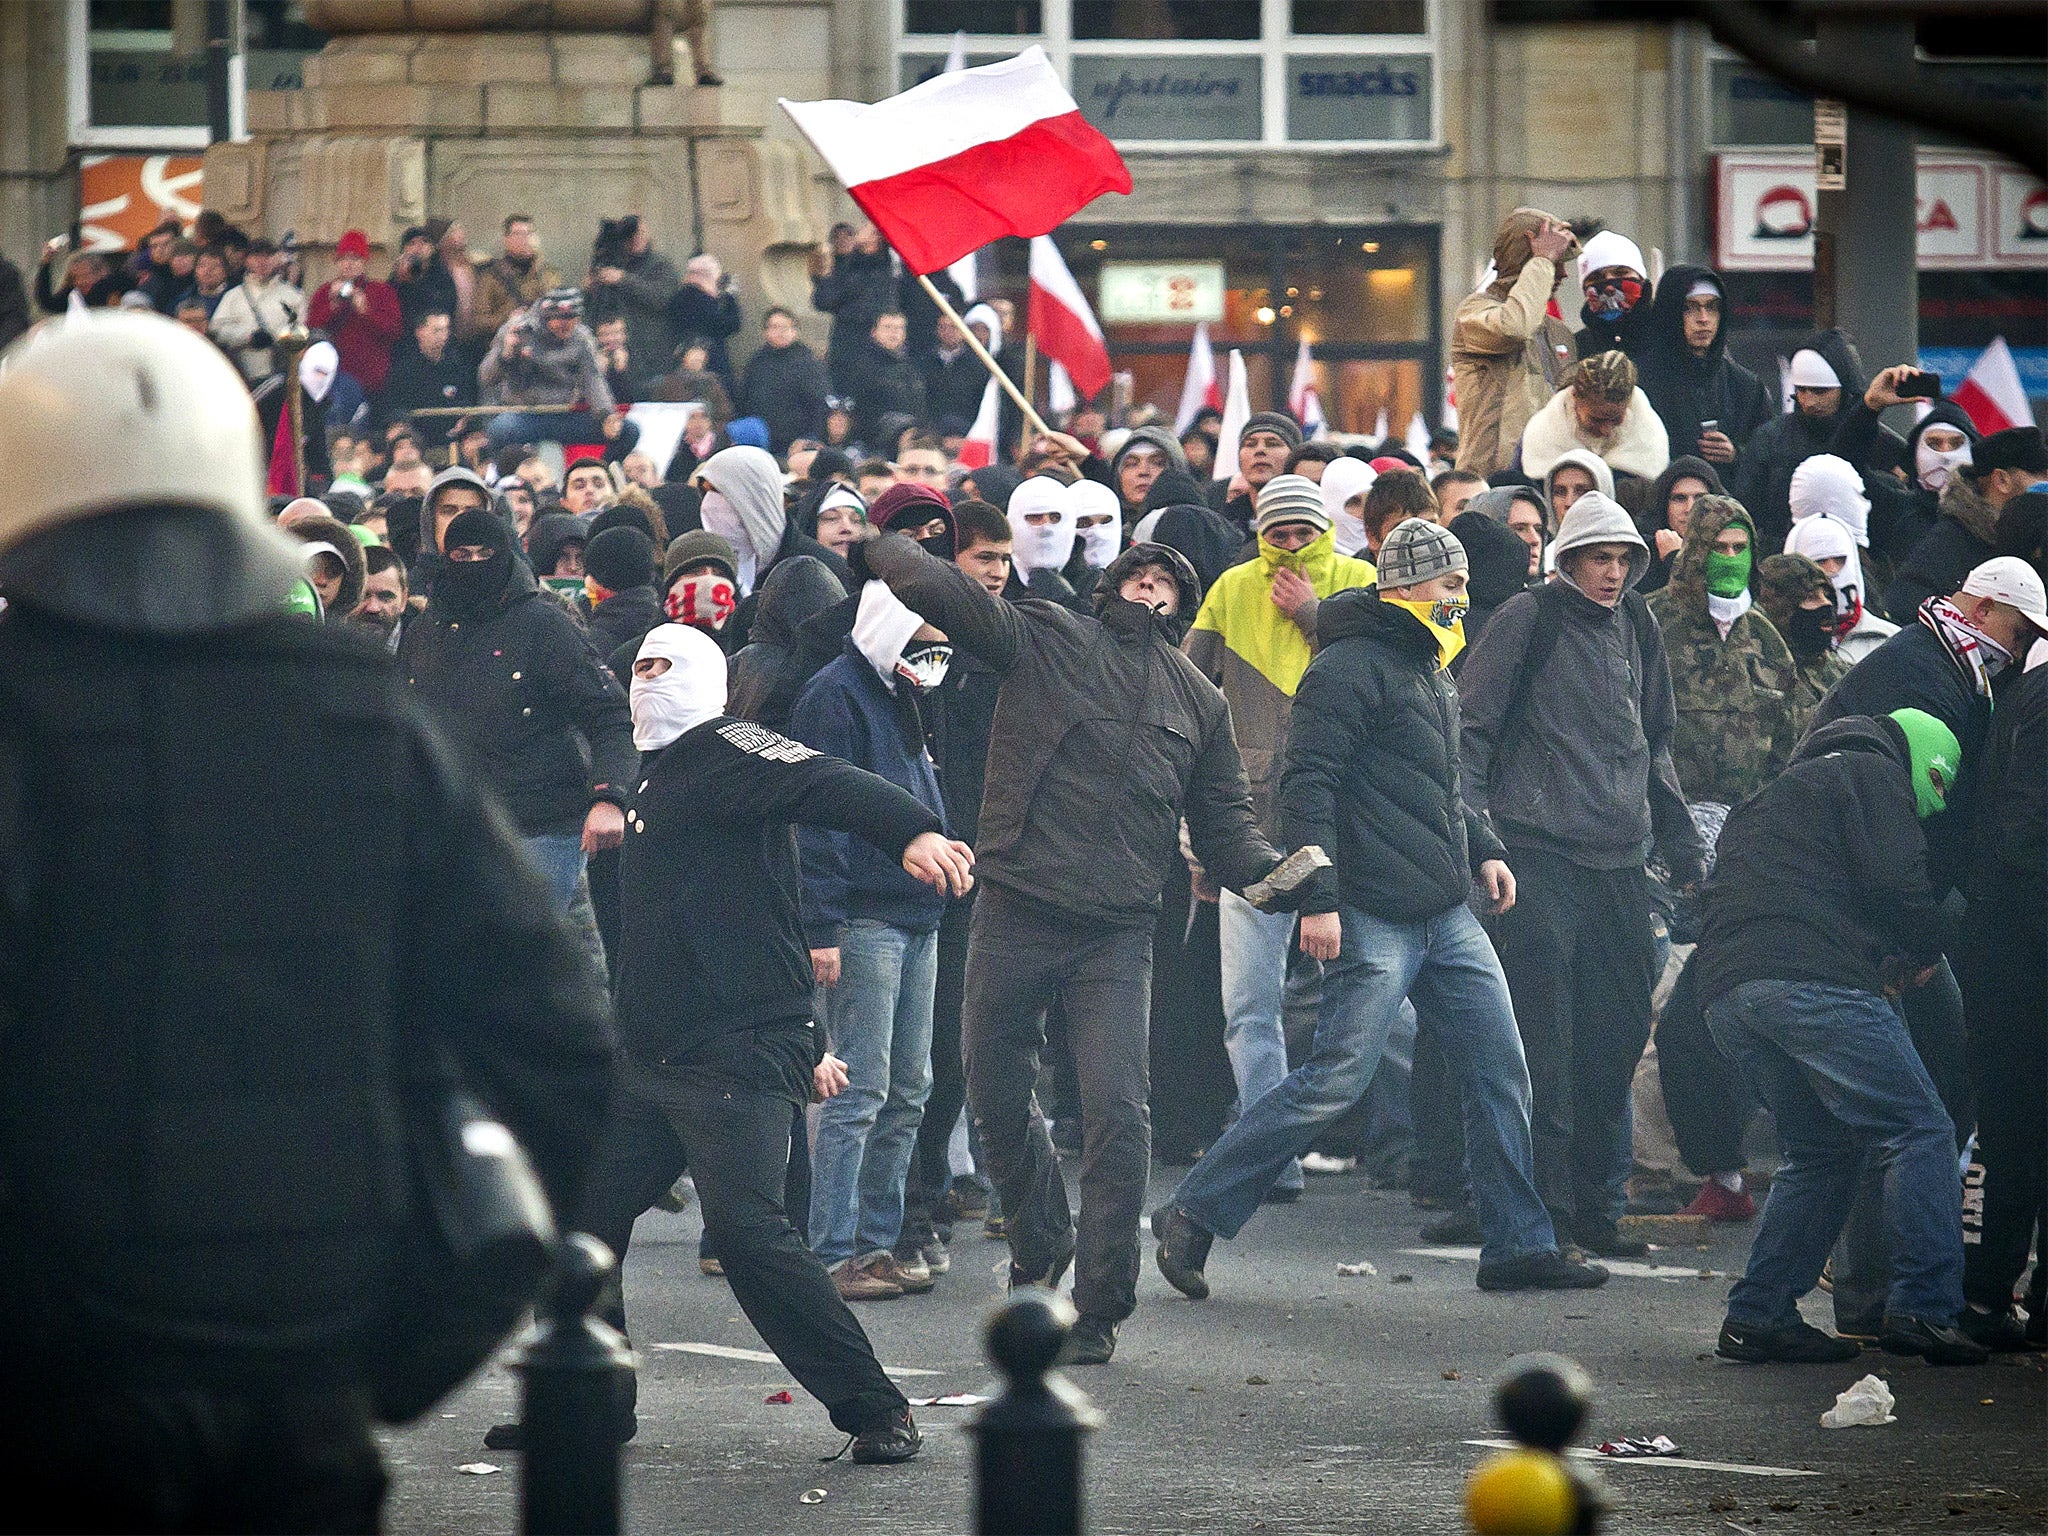 Far-right ultras have clashed with the Polish police in the past